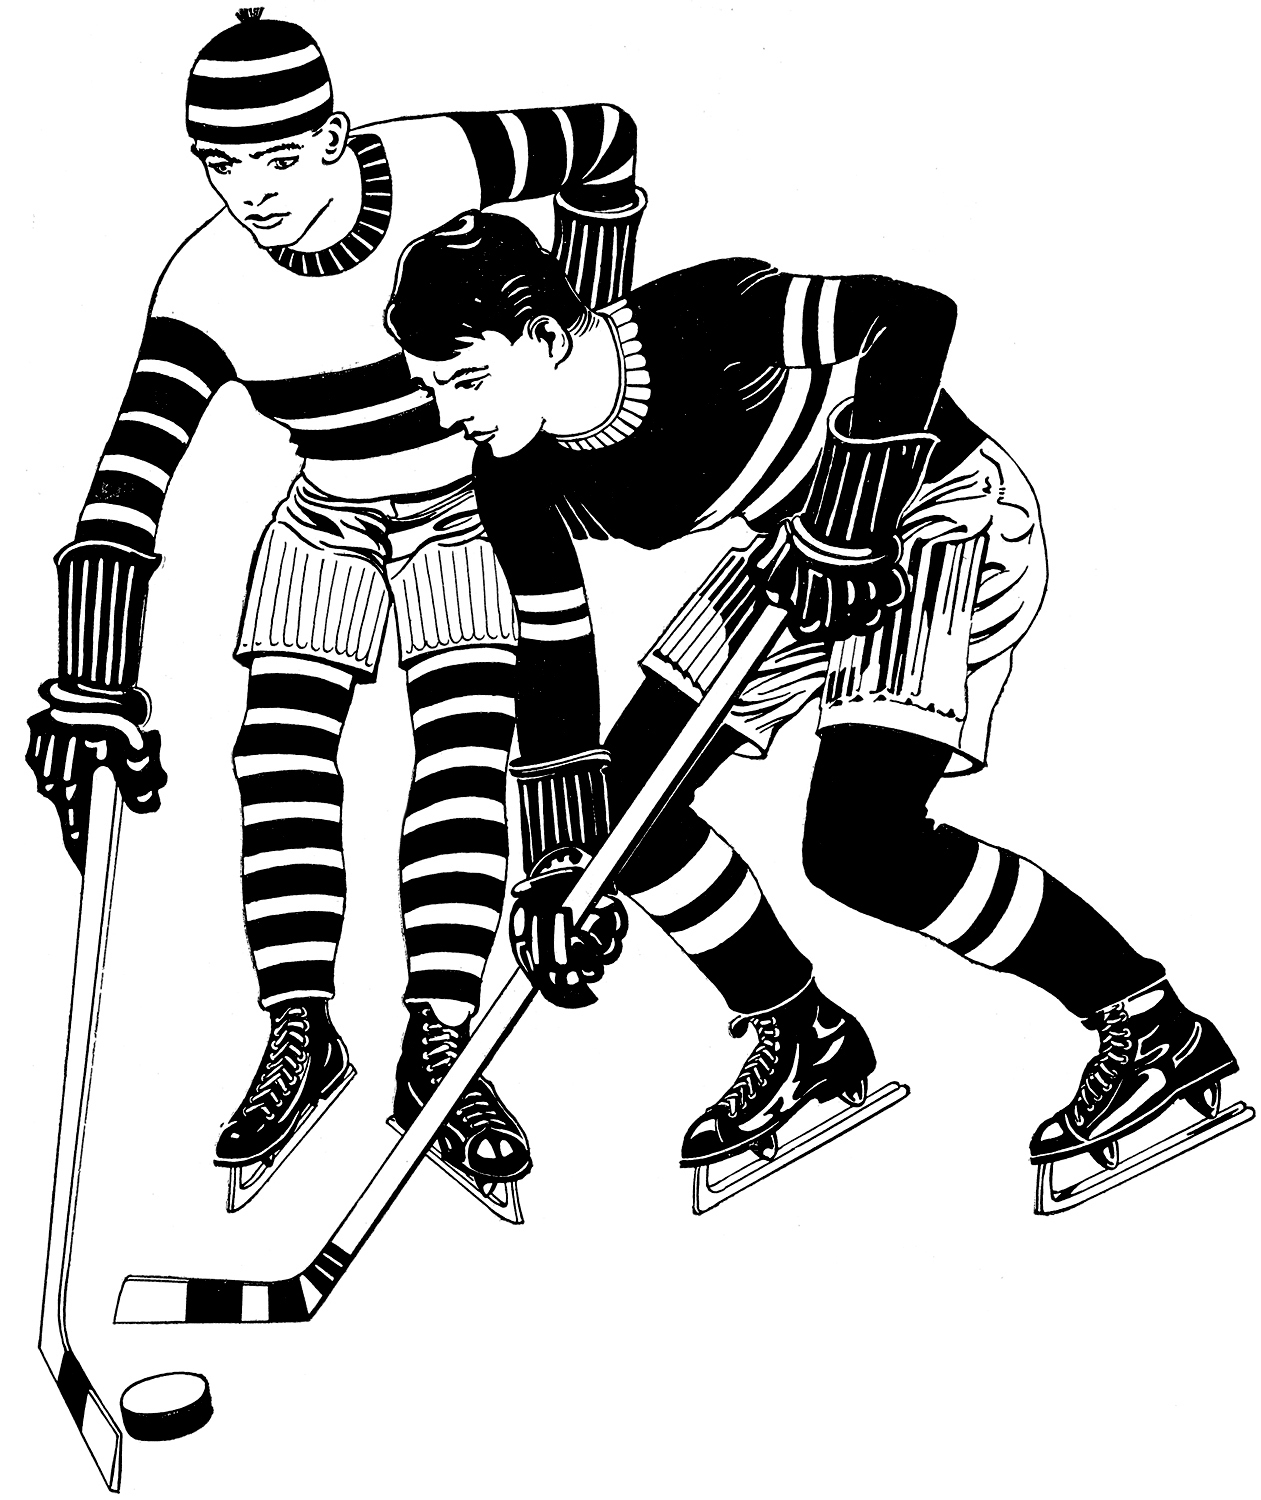 Hockey clipart vintage. Fun image the graphics